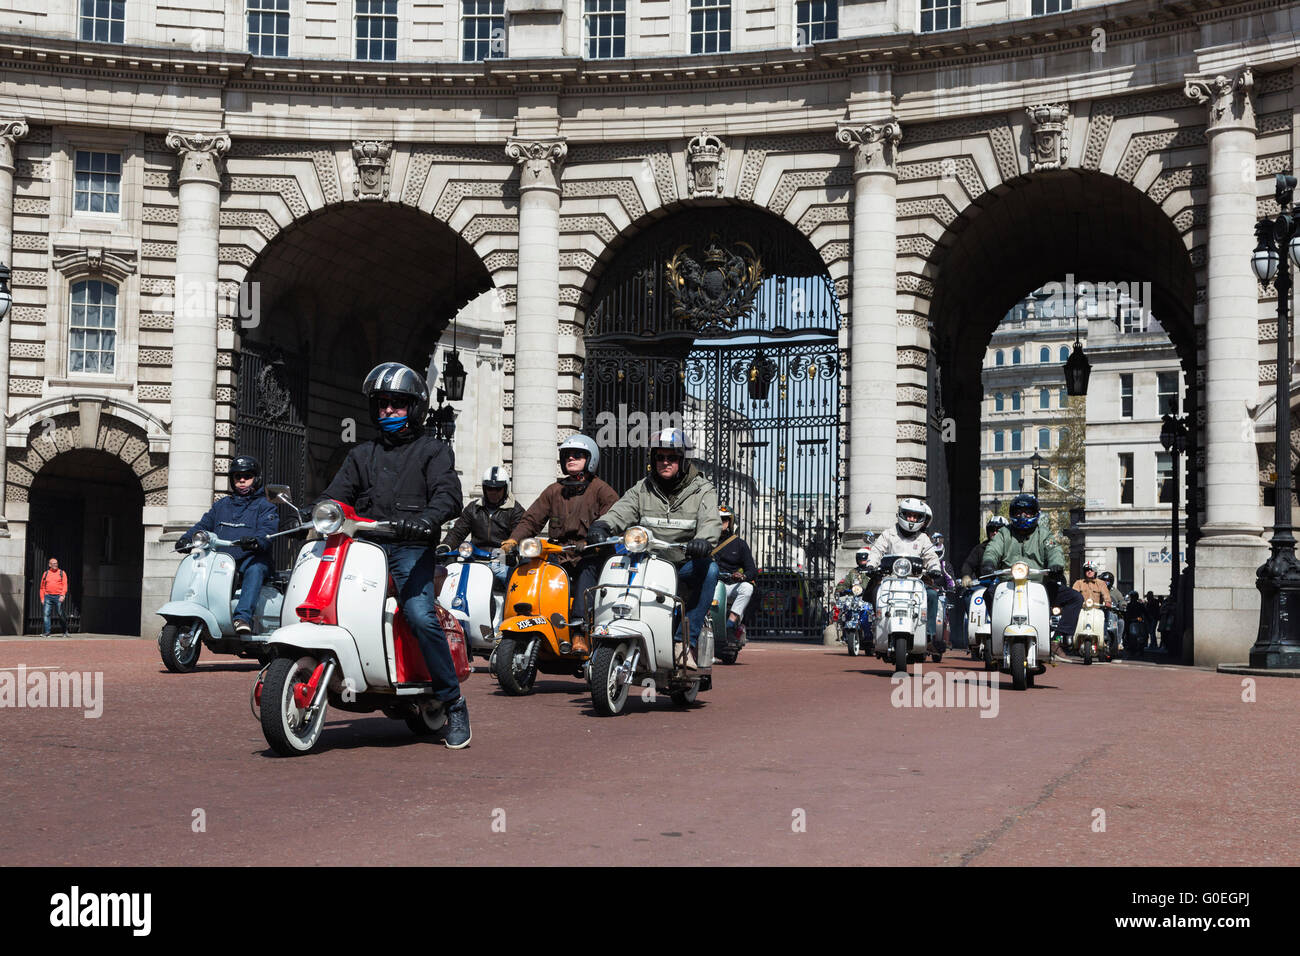 London, UK. 1 May 2016. Scooterists on The Mall. Hundreds of scooterists take part in the annual Buckingham Palace Scooter Run in Central London. © Vibrant Pictures/Alamy Stock Photo